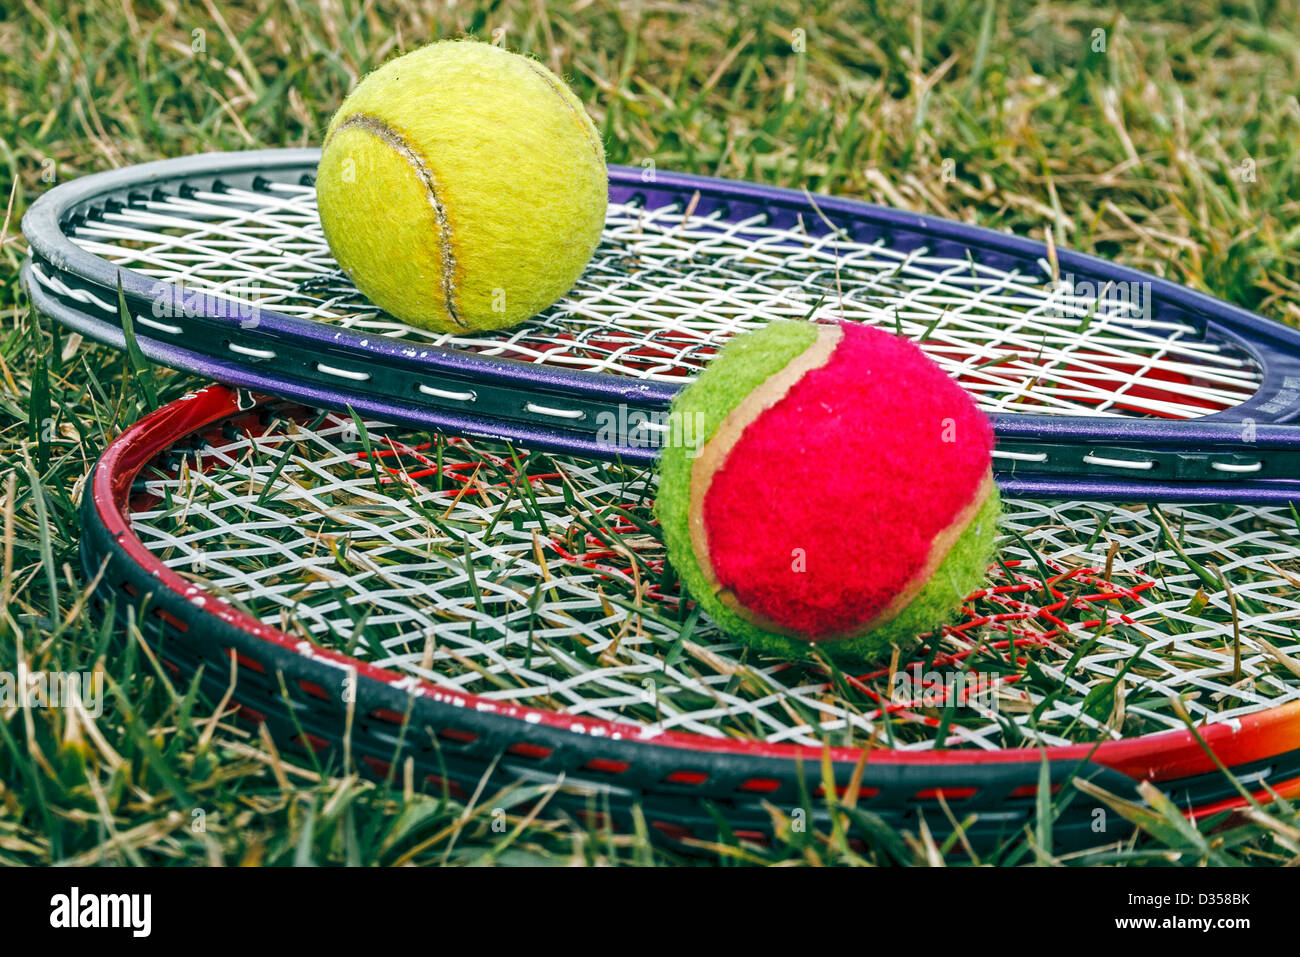 Badminton rackets and balls placed on the grass. Stock Photo